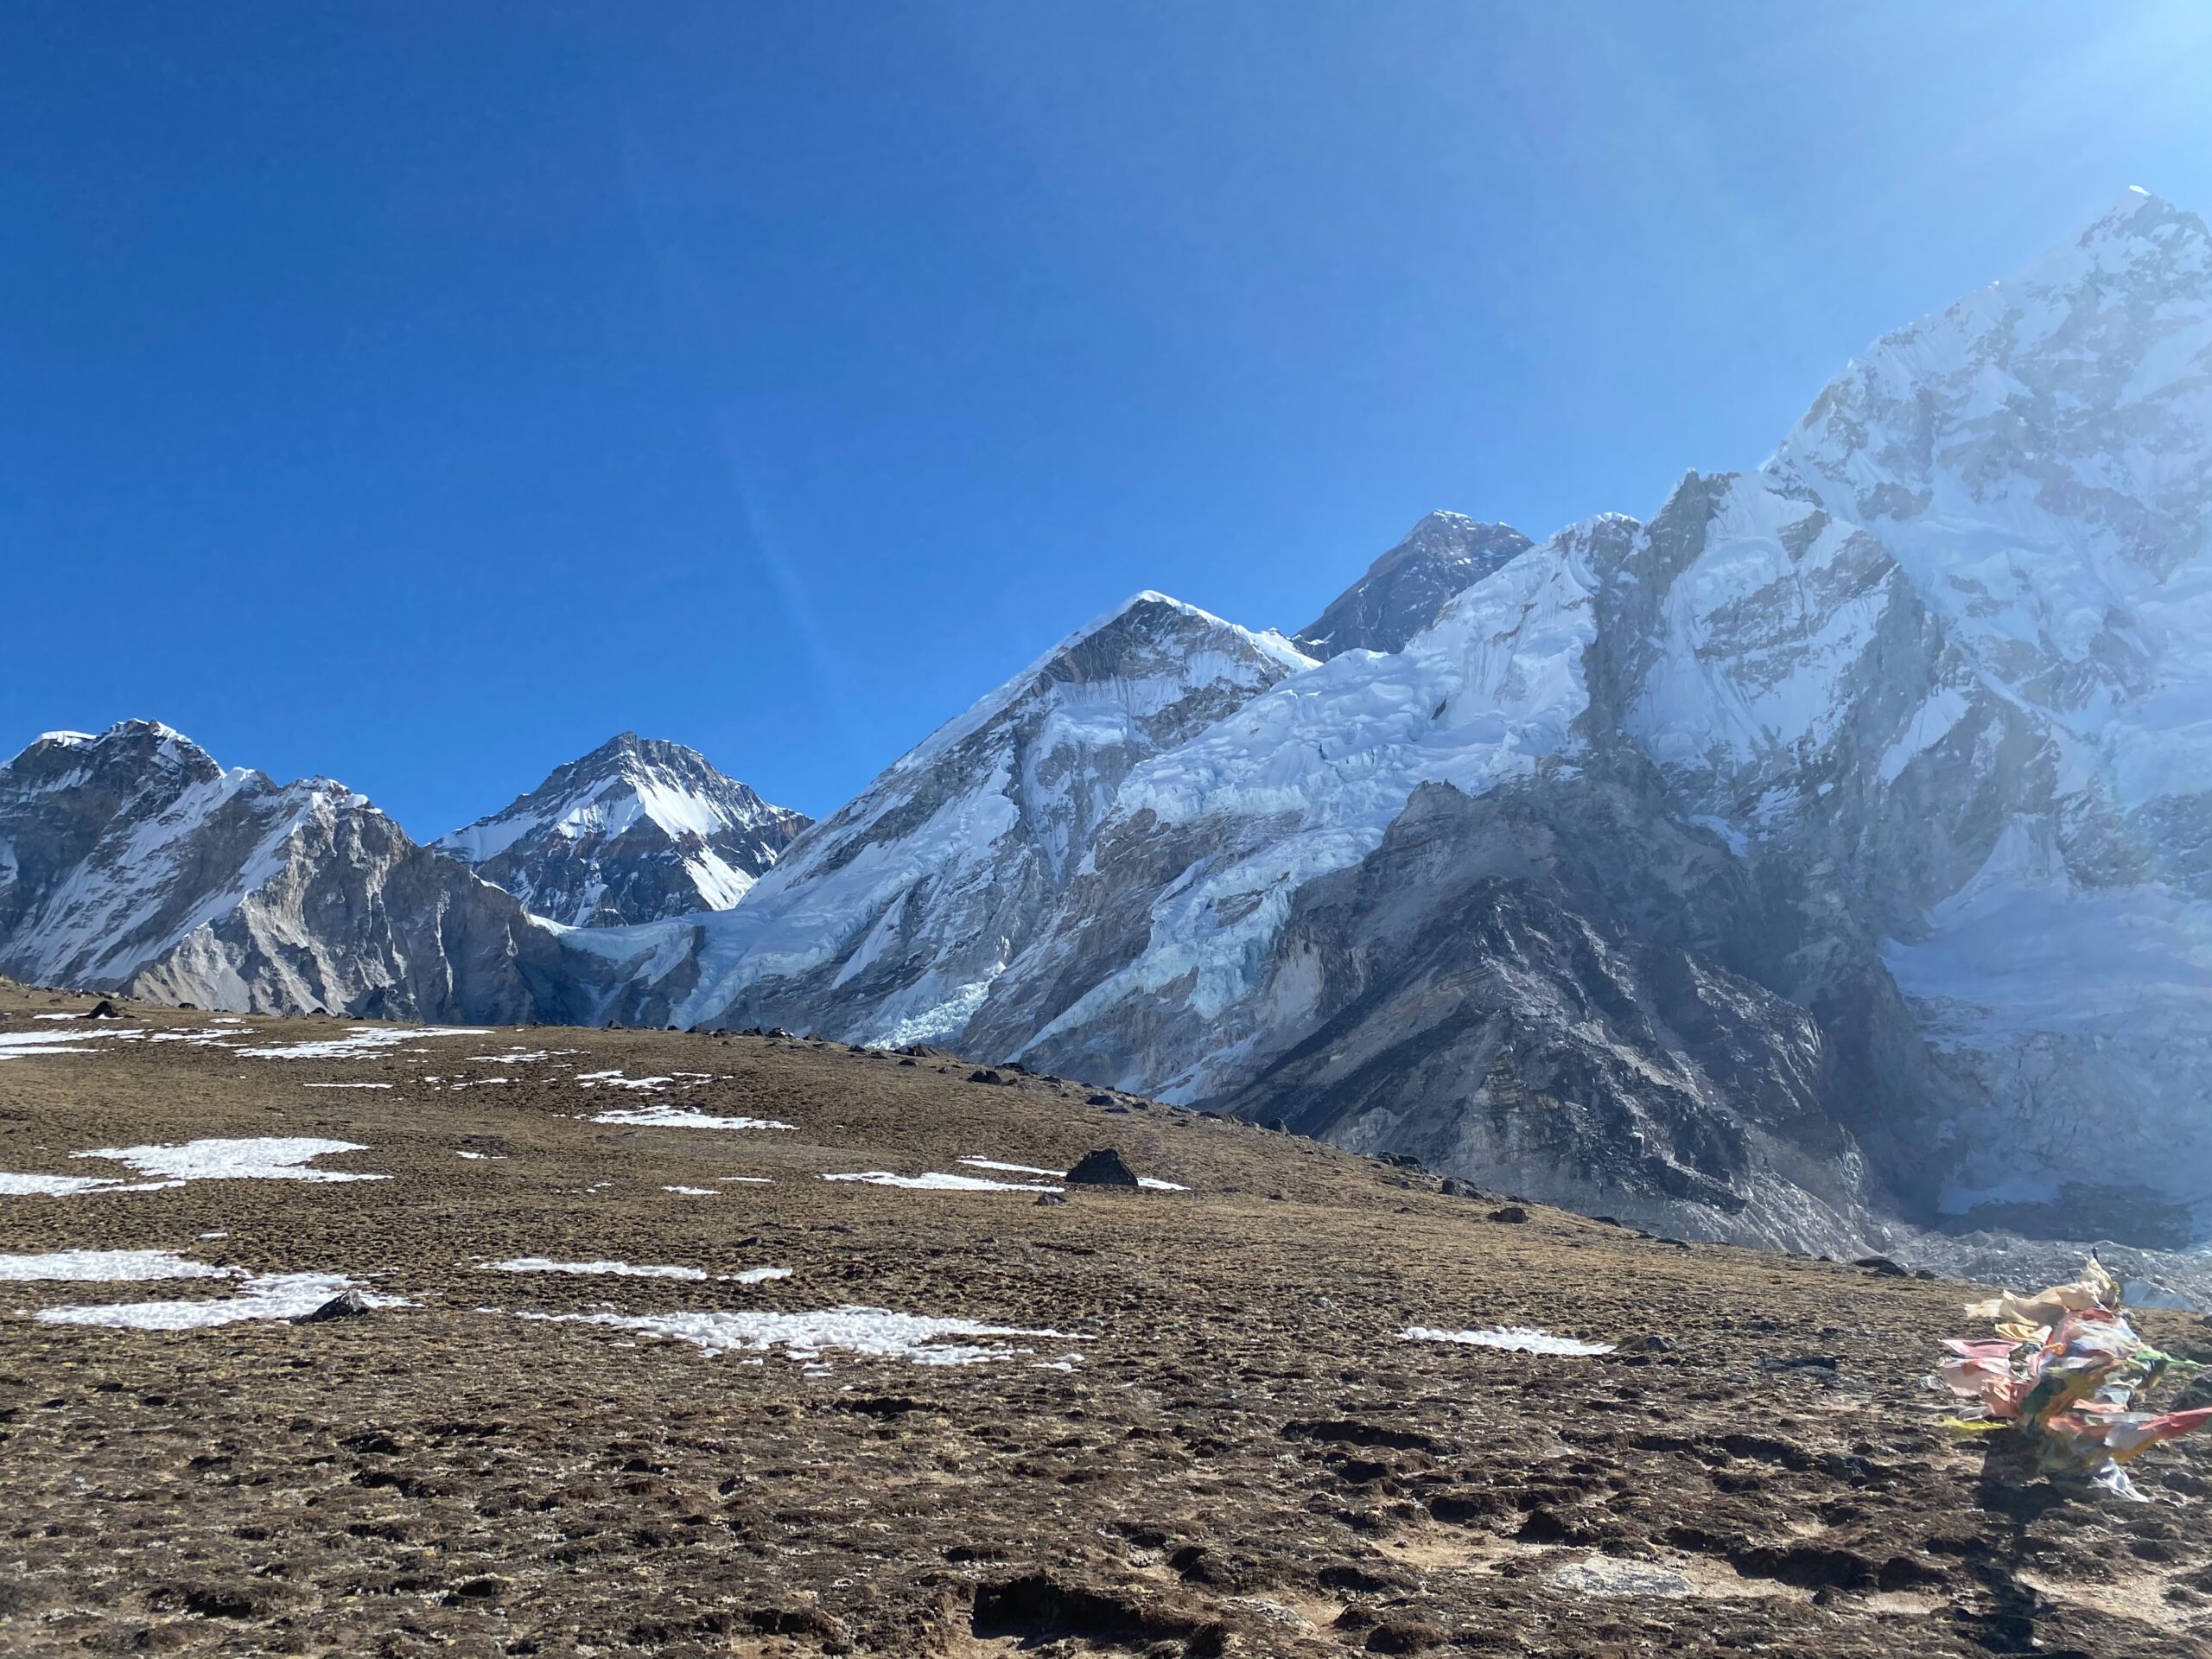 The Ultimate Guide to Everest Base Camp Trek